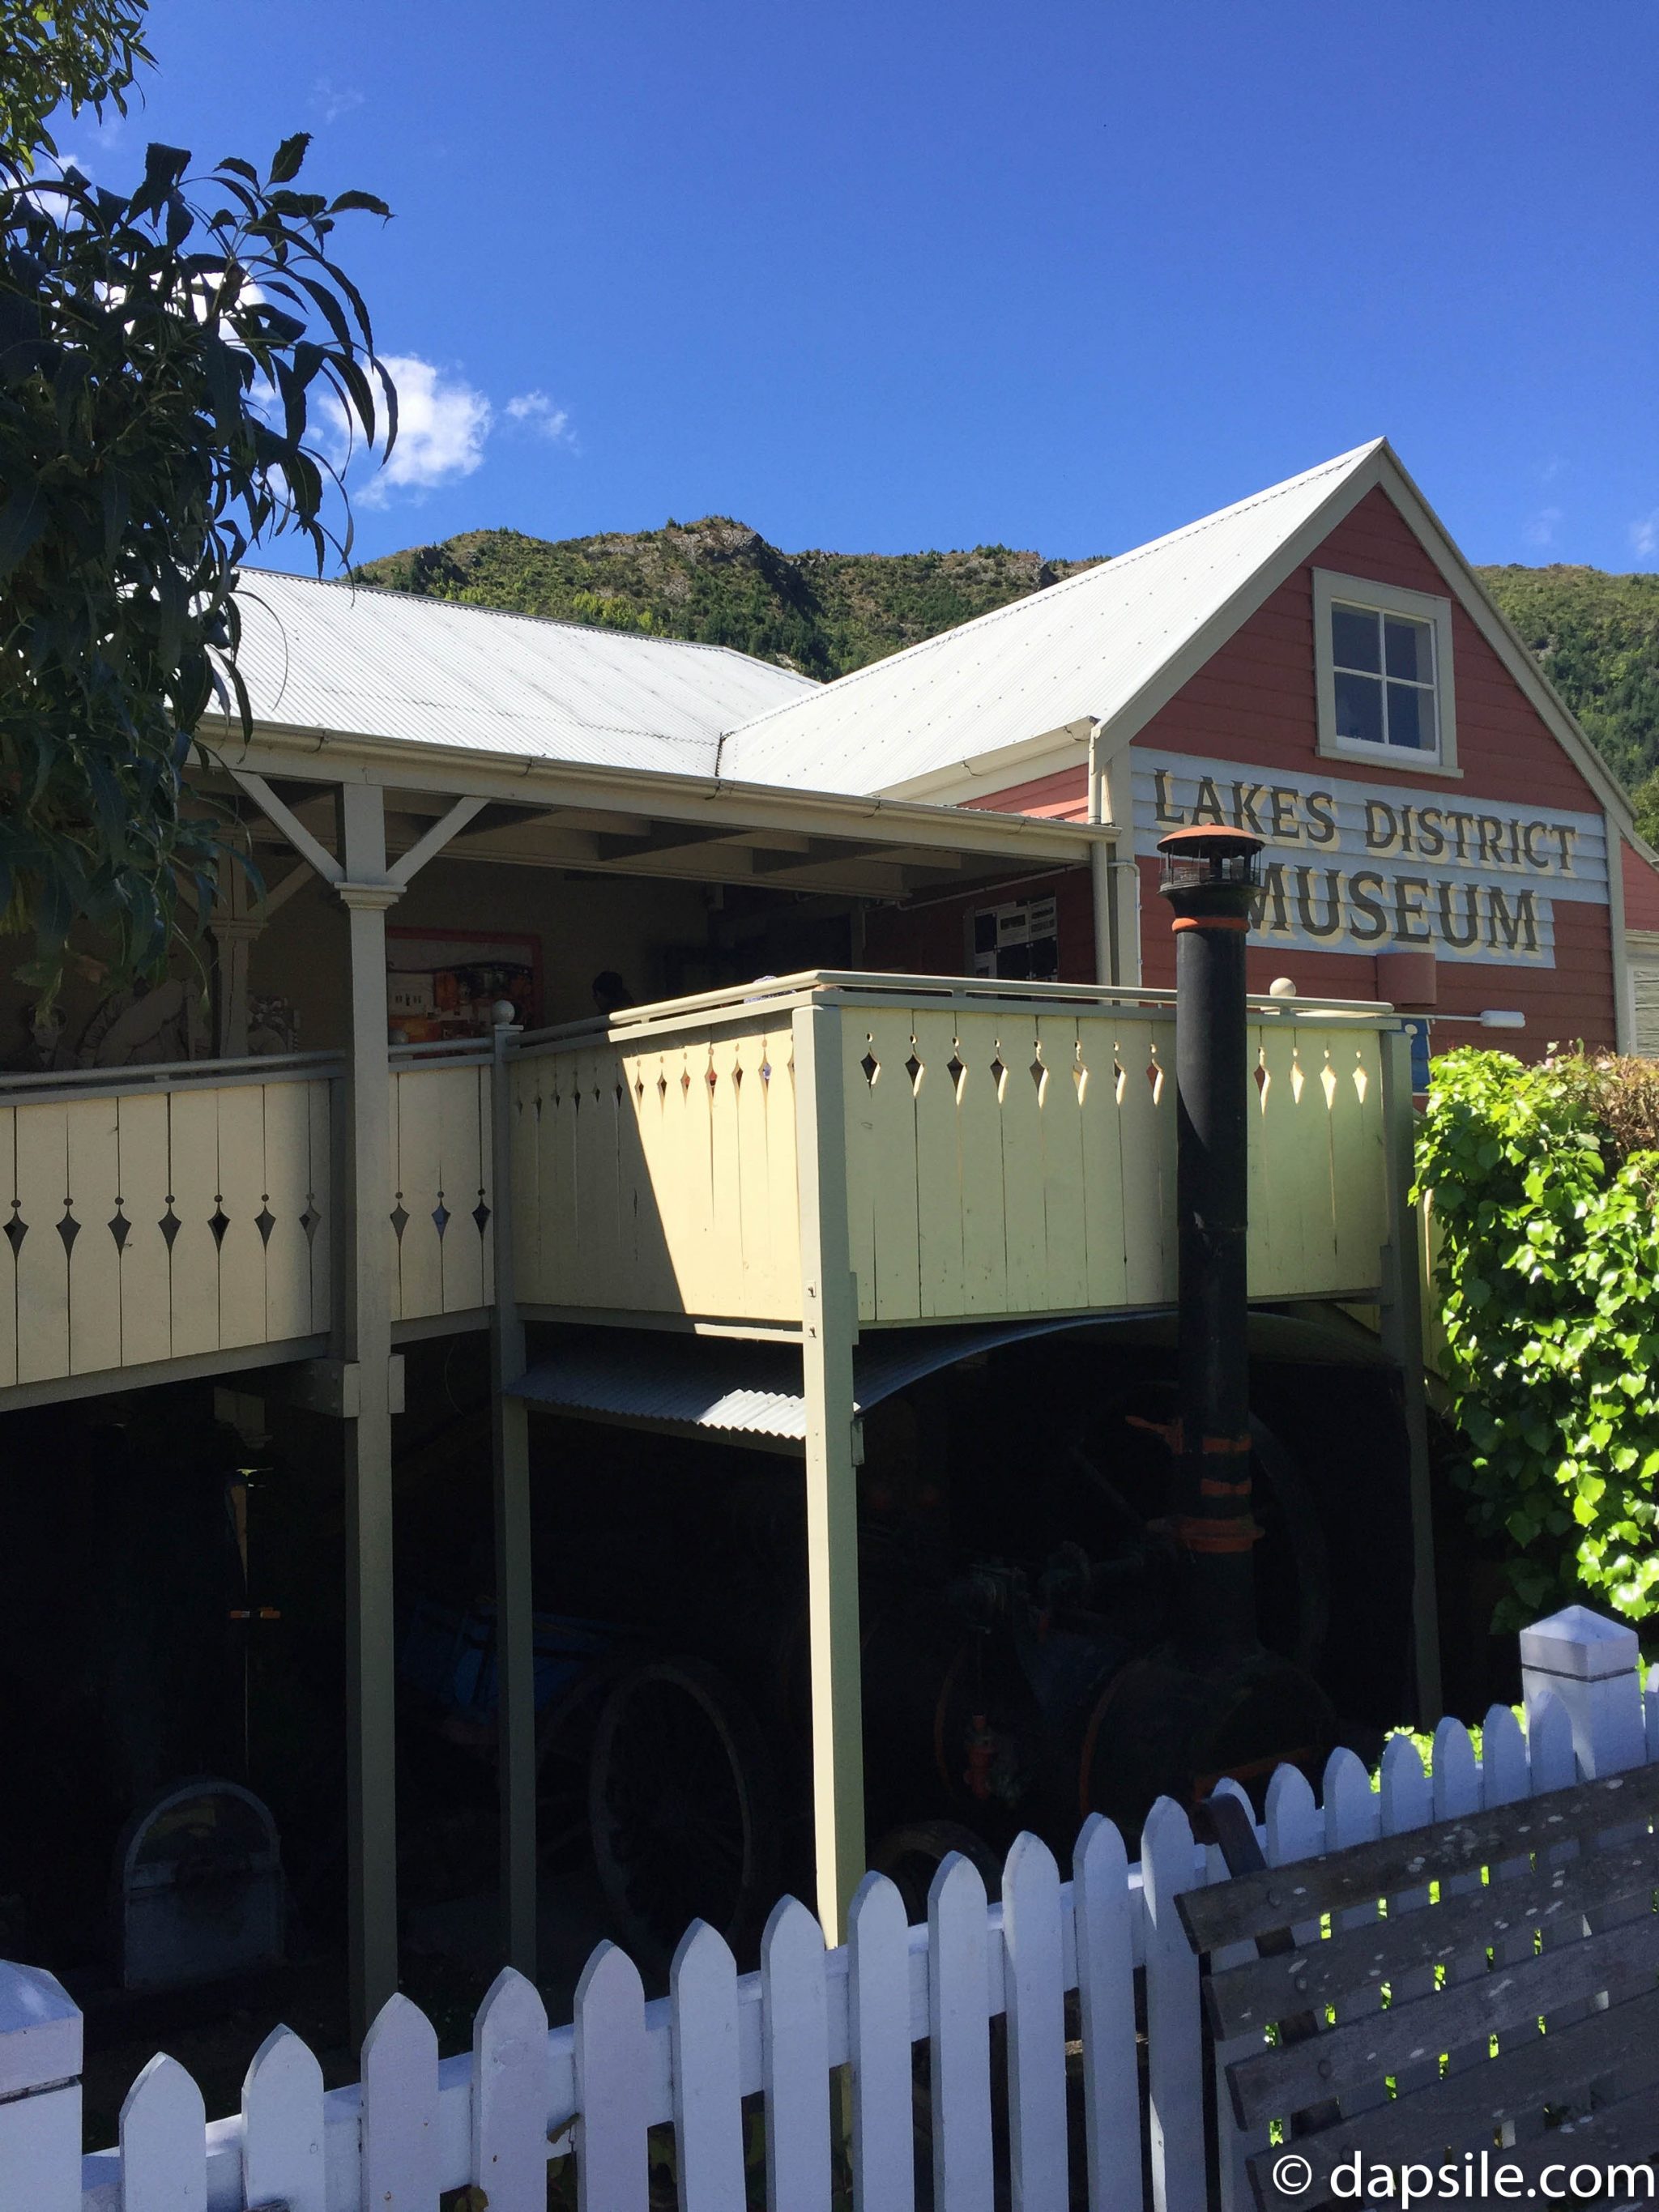 historical building housing the Lakes District Museum in Arrowtown